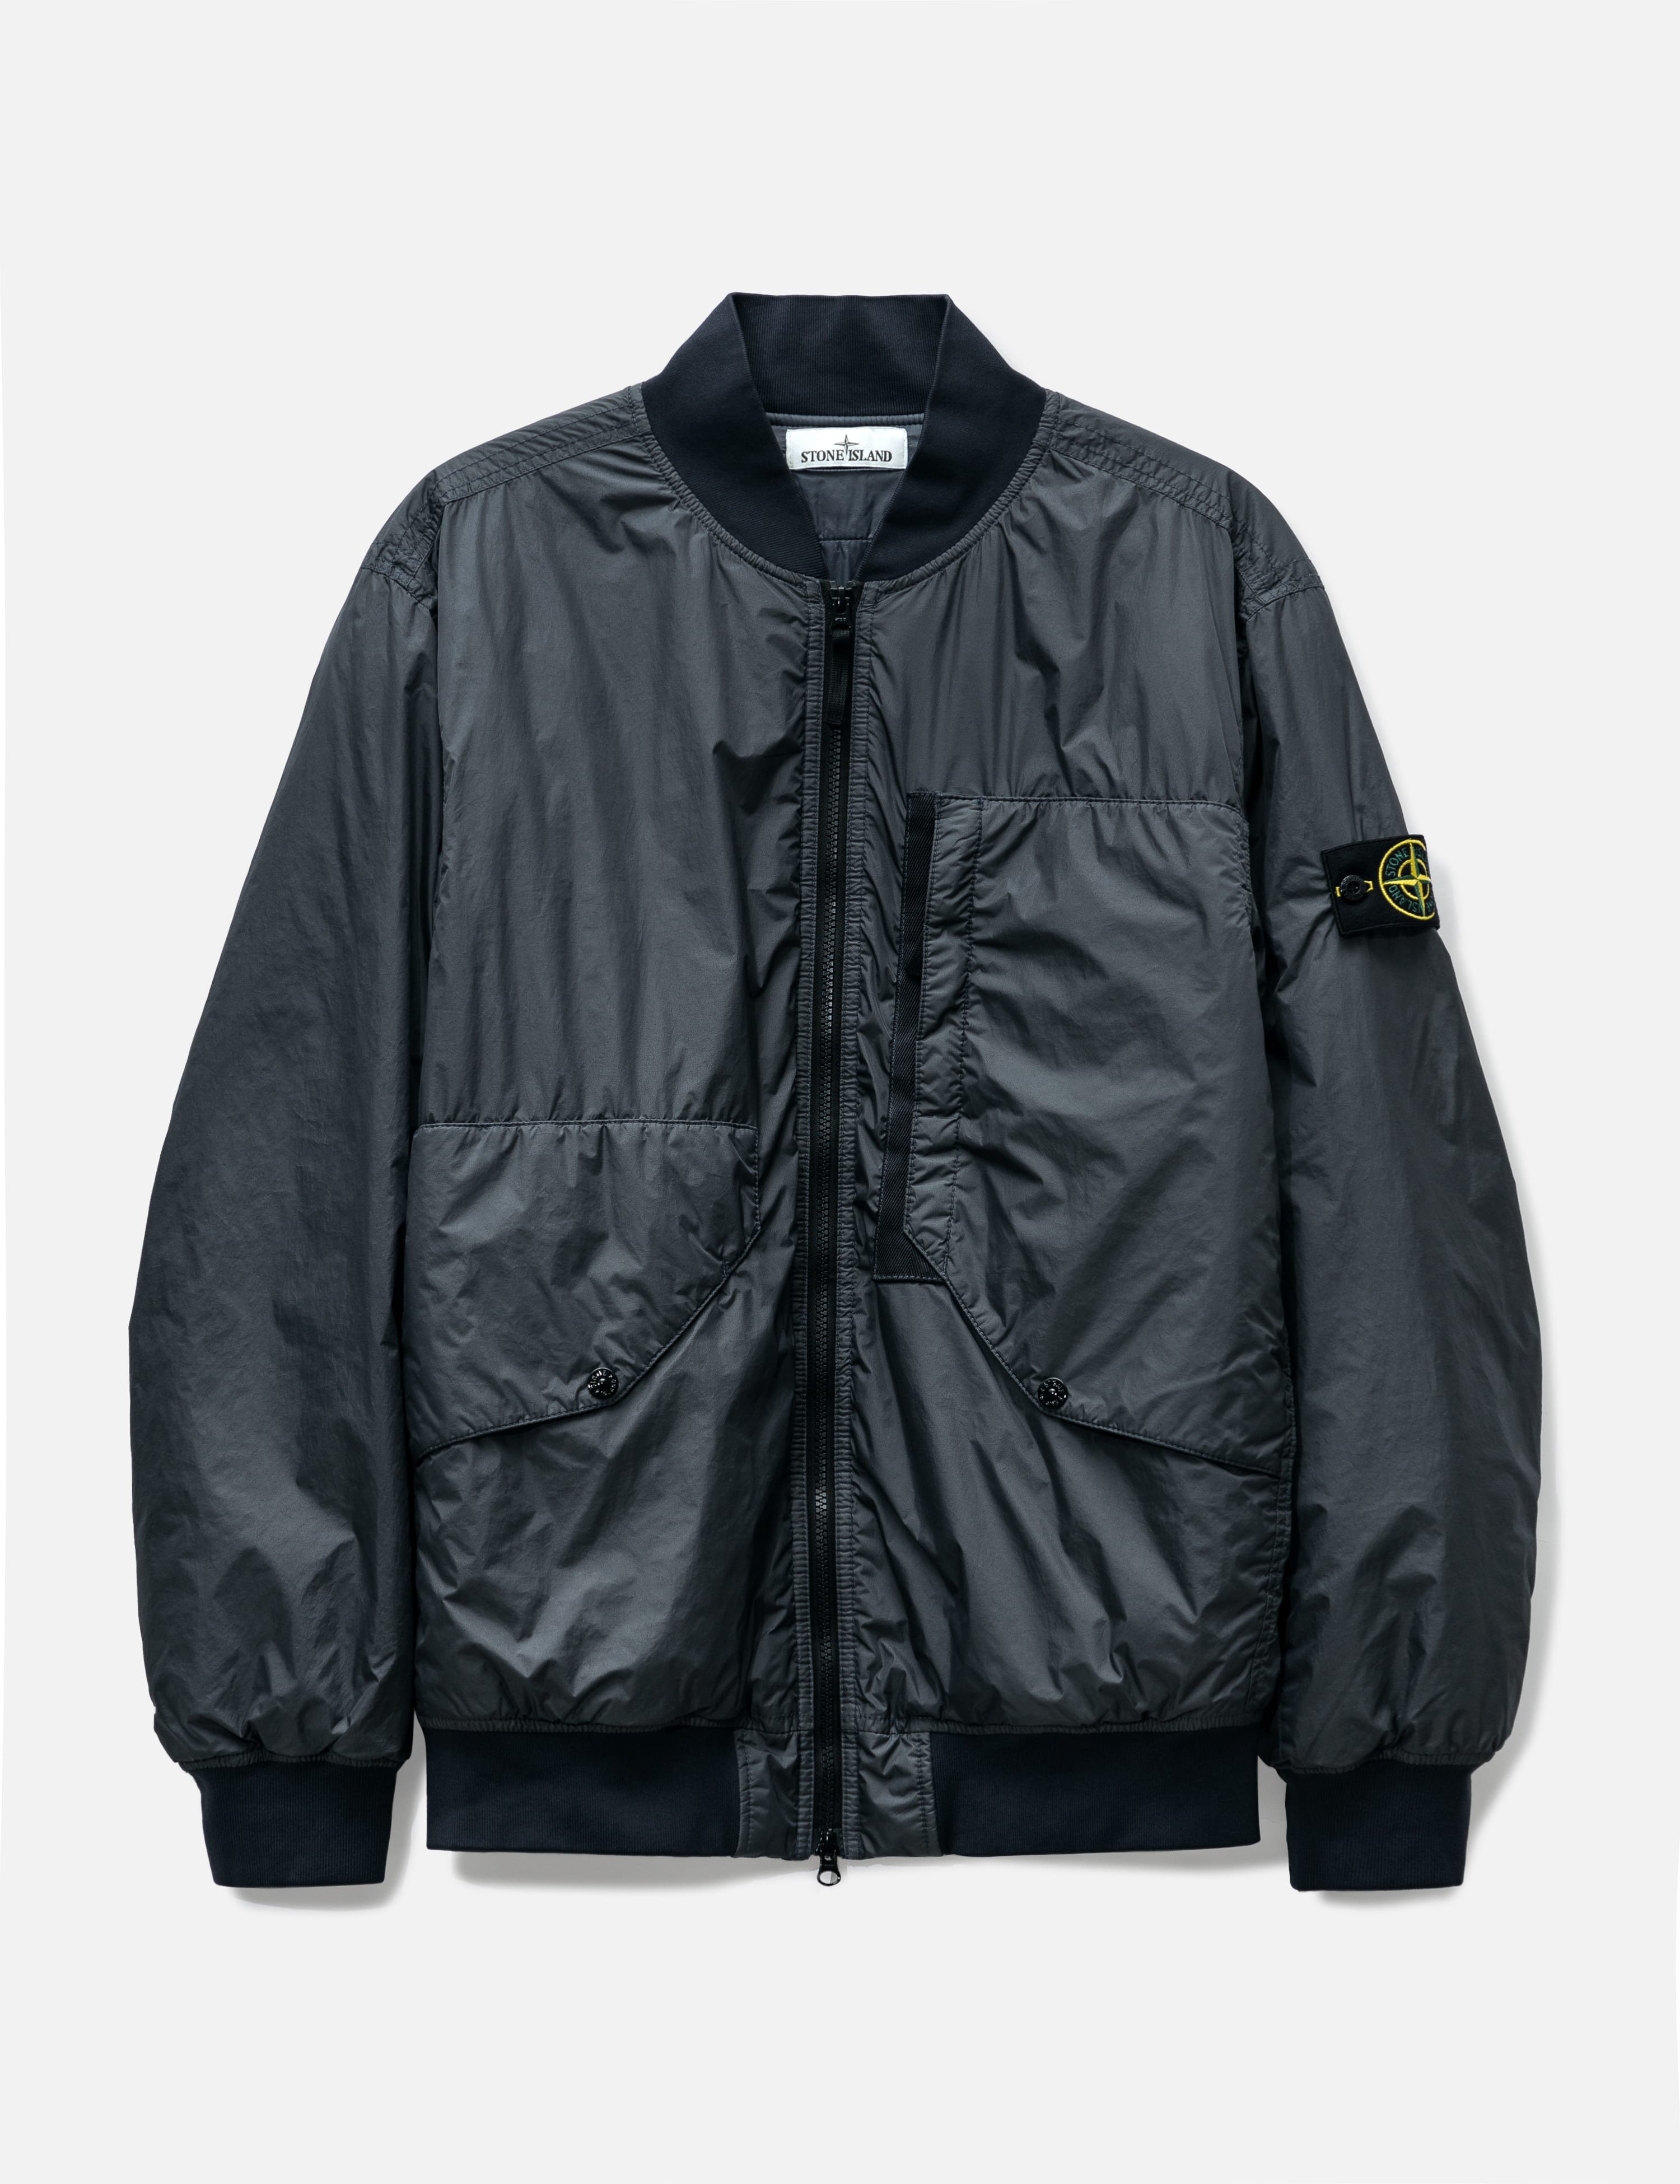 OAMC - PEACEMAKER LITHIUM JACKET | HBX - Globally Curated Fashion 